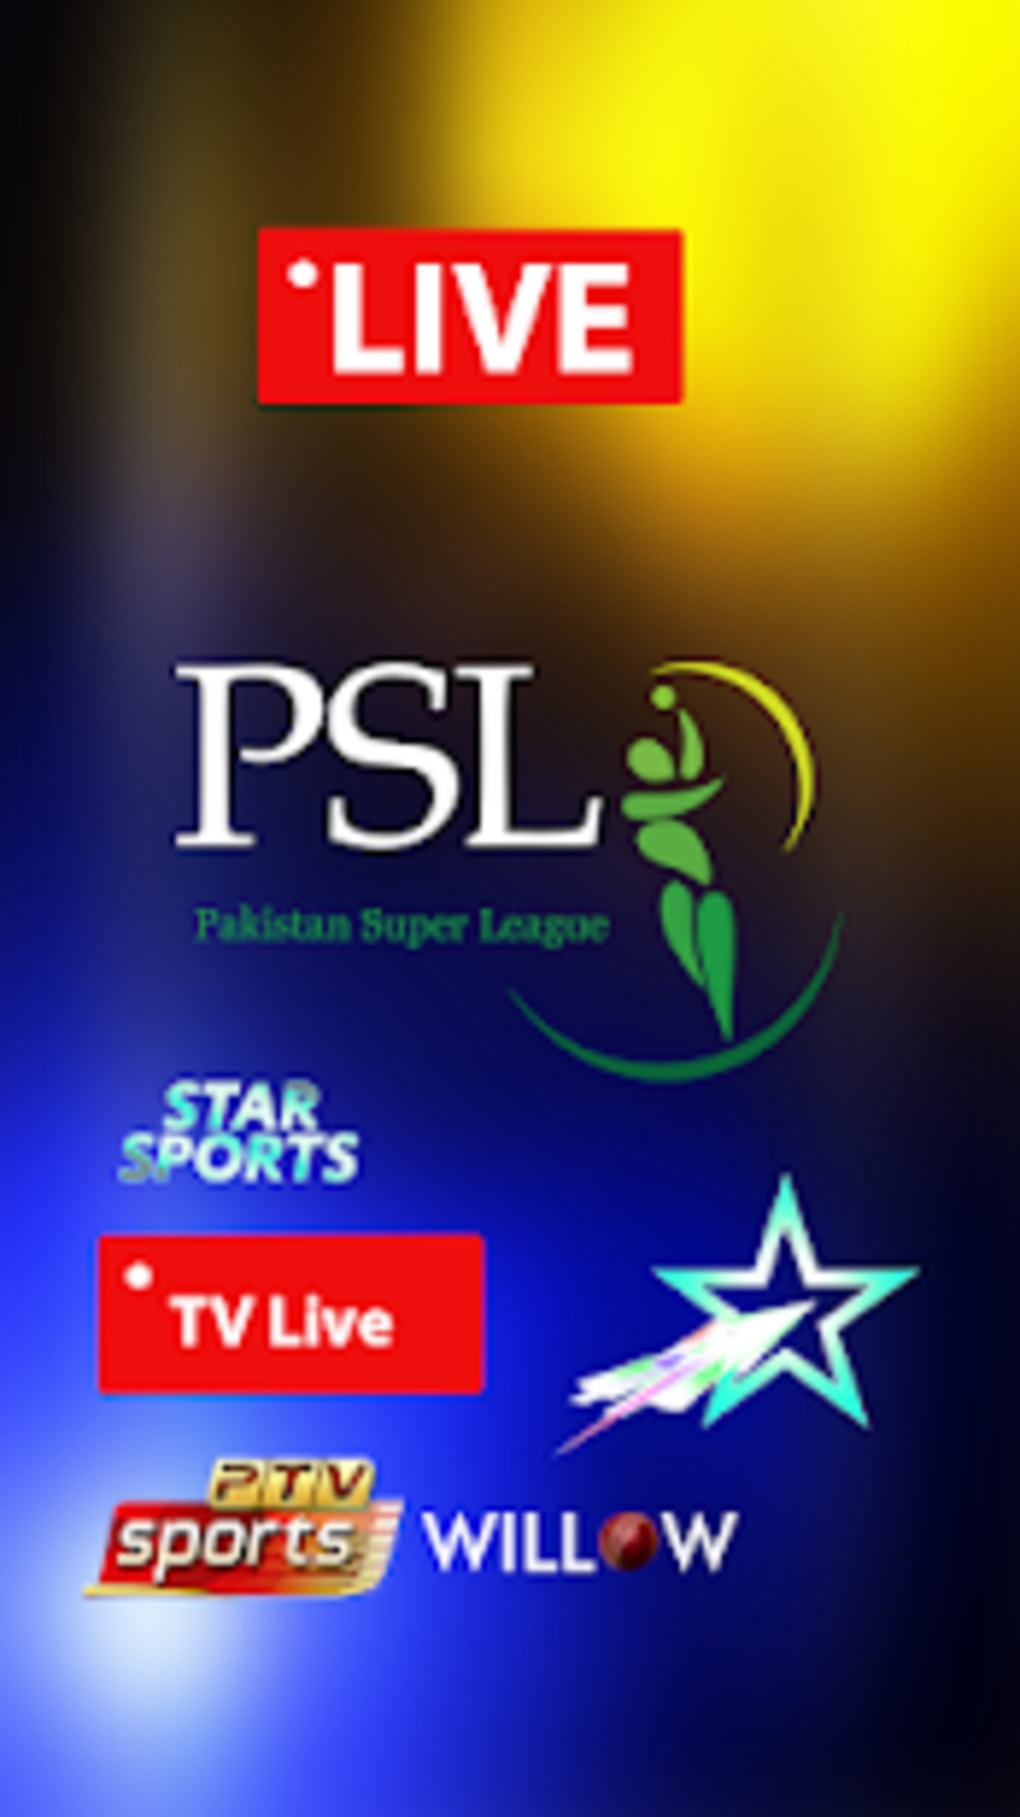 PSL 4 Live TV 2019 APK for Android